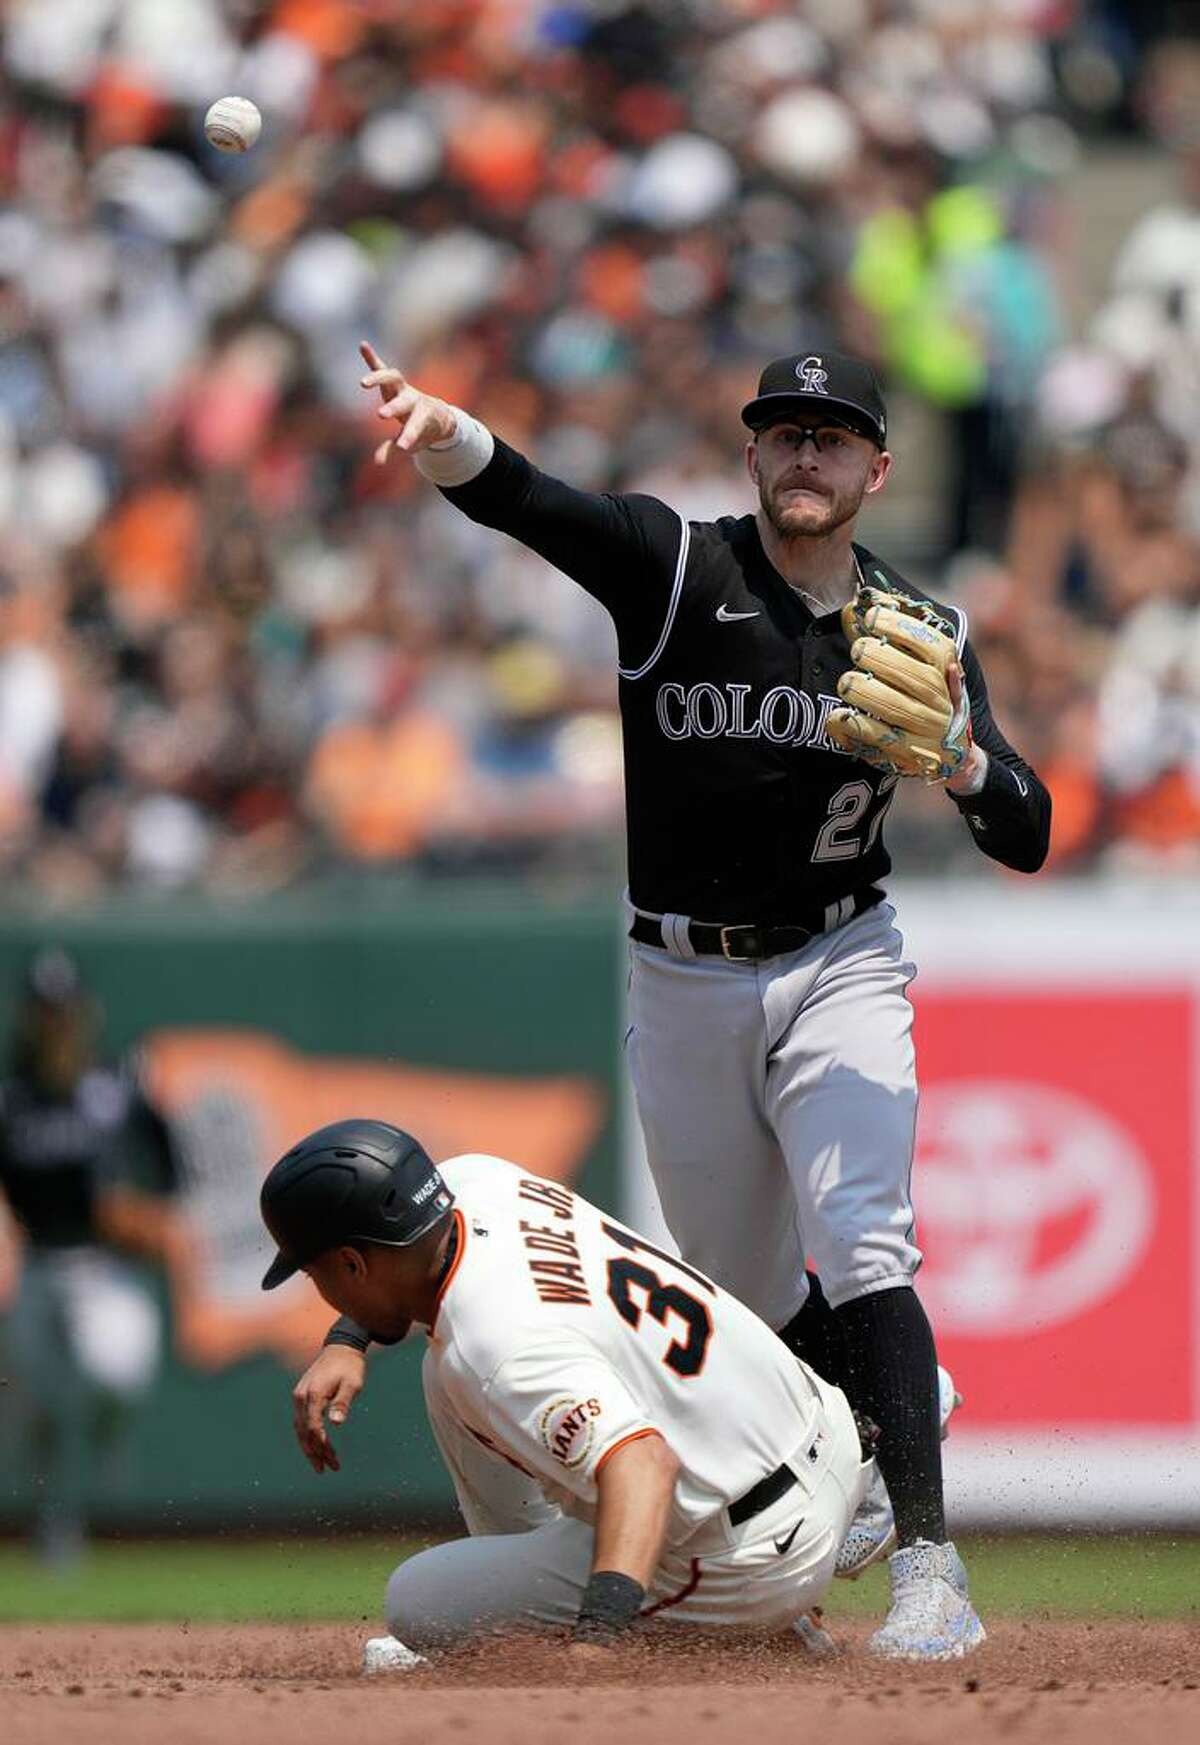 SAN FRANCISCO, CALIFORNIA - AUGUST 15: Trevor Story #27 of the Colorado Rockies completes the double-play throwing over the top of LaMonte Wade Jr #31 of the San Francisco Giants in the bottom of the third inning at Oracle Park on August 15, 2021 in San Francisco, California. (Photo by Thearon W. Henderson/Getty Images)